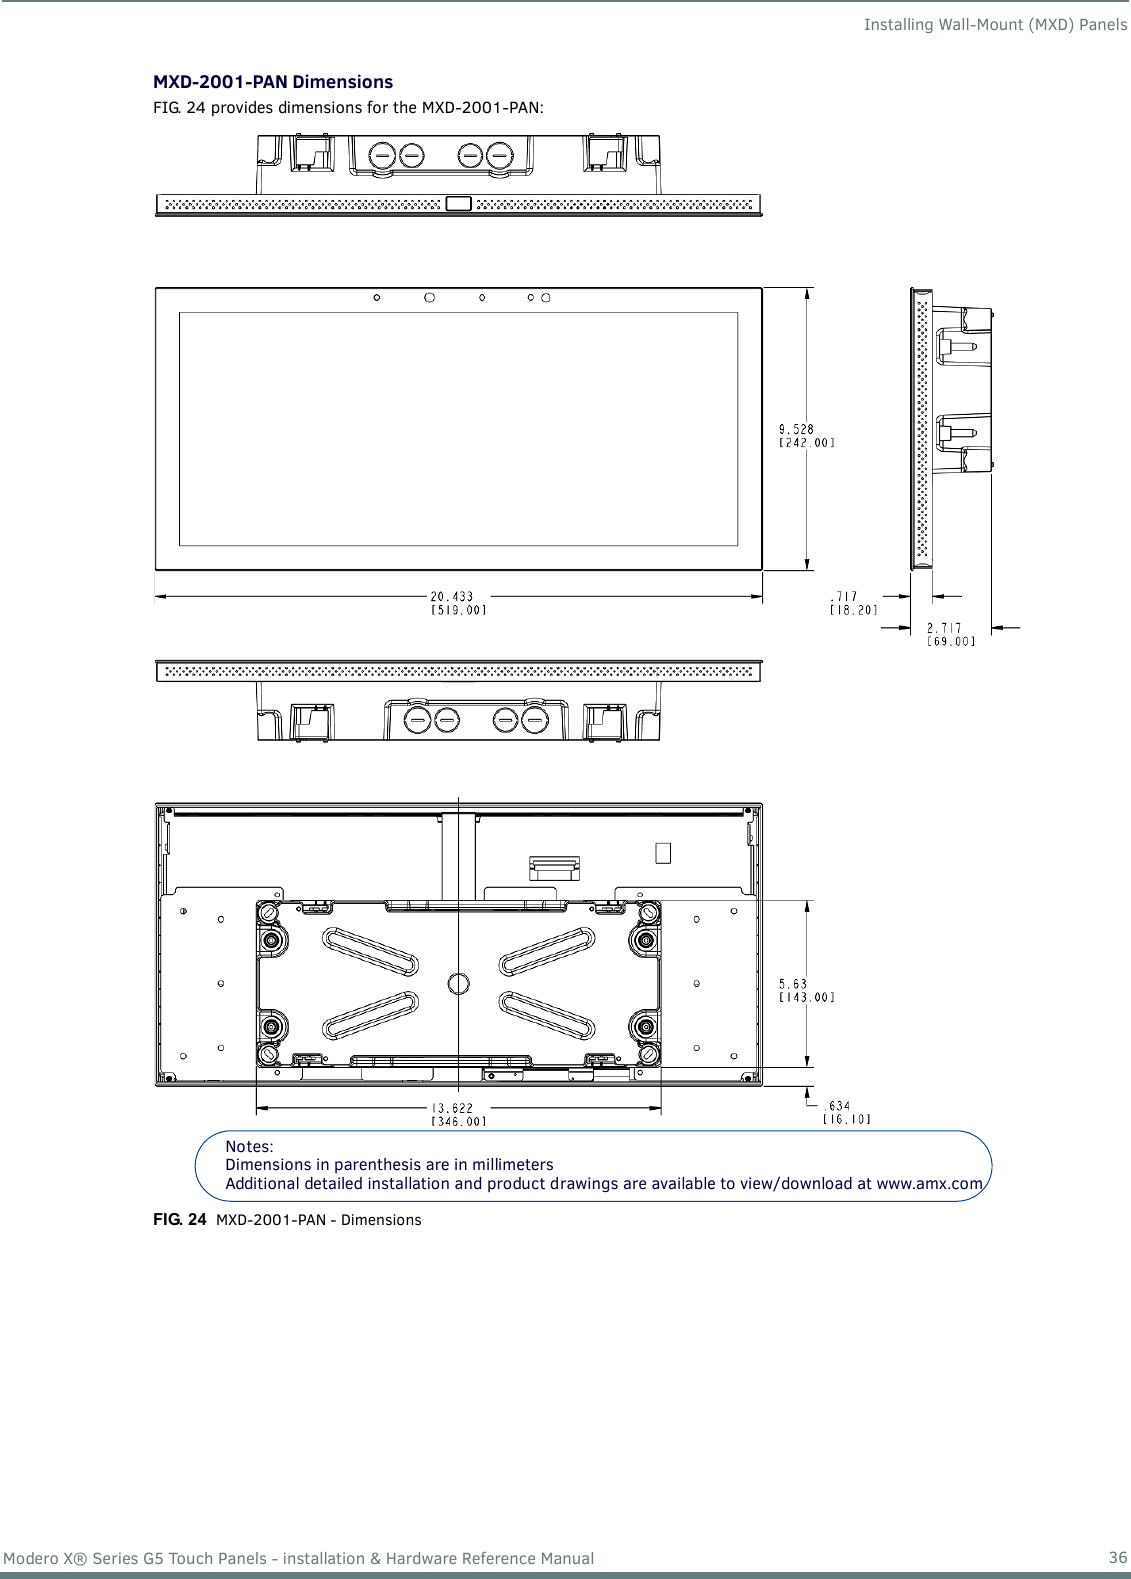 Installing Wall-Mount (MXD) Panels36Modero X® Series G5 Touch Panels - installation &amp; Hardware Reference ManualMXD-2001-PAN DimensionsFIG. 24 provides dimensions for the MXD-2001-PAN: FIG. 24  MXD-2001-PAN - DimensionsNotes: Dimensions in parenthesis are in millimetersAdditional detailed installation and product drawings are available to view/download at www.amx.com 